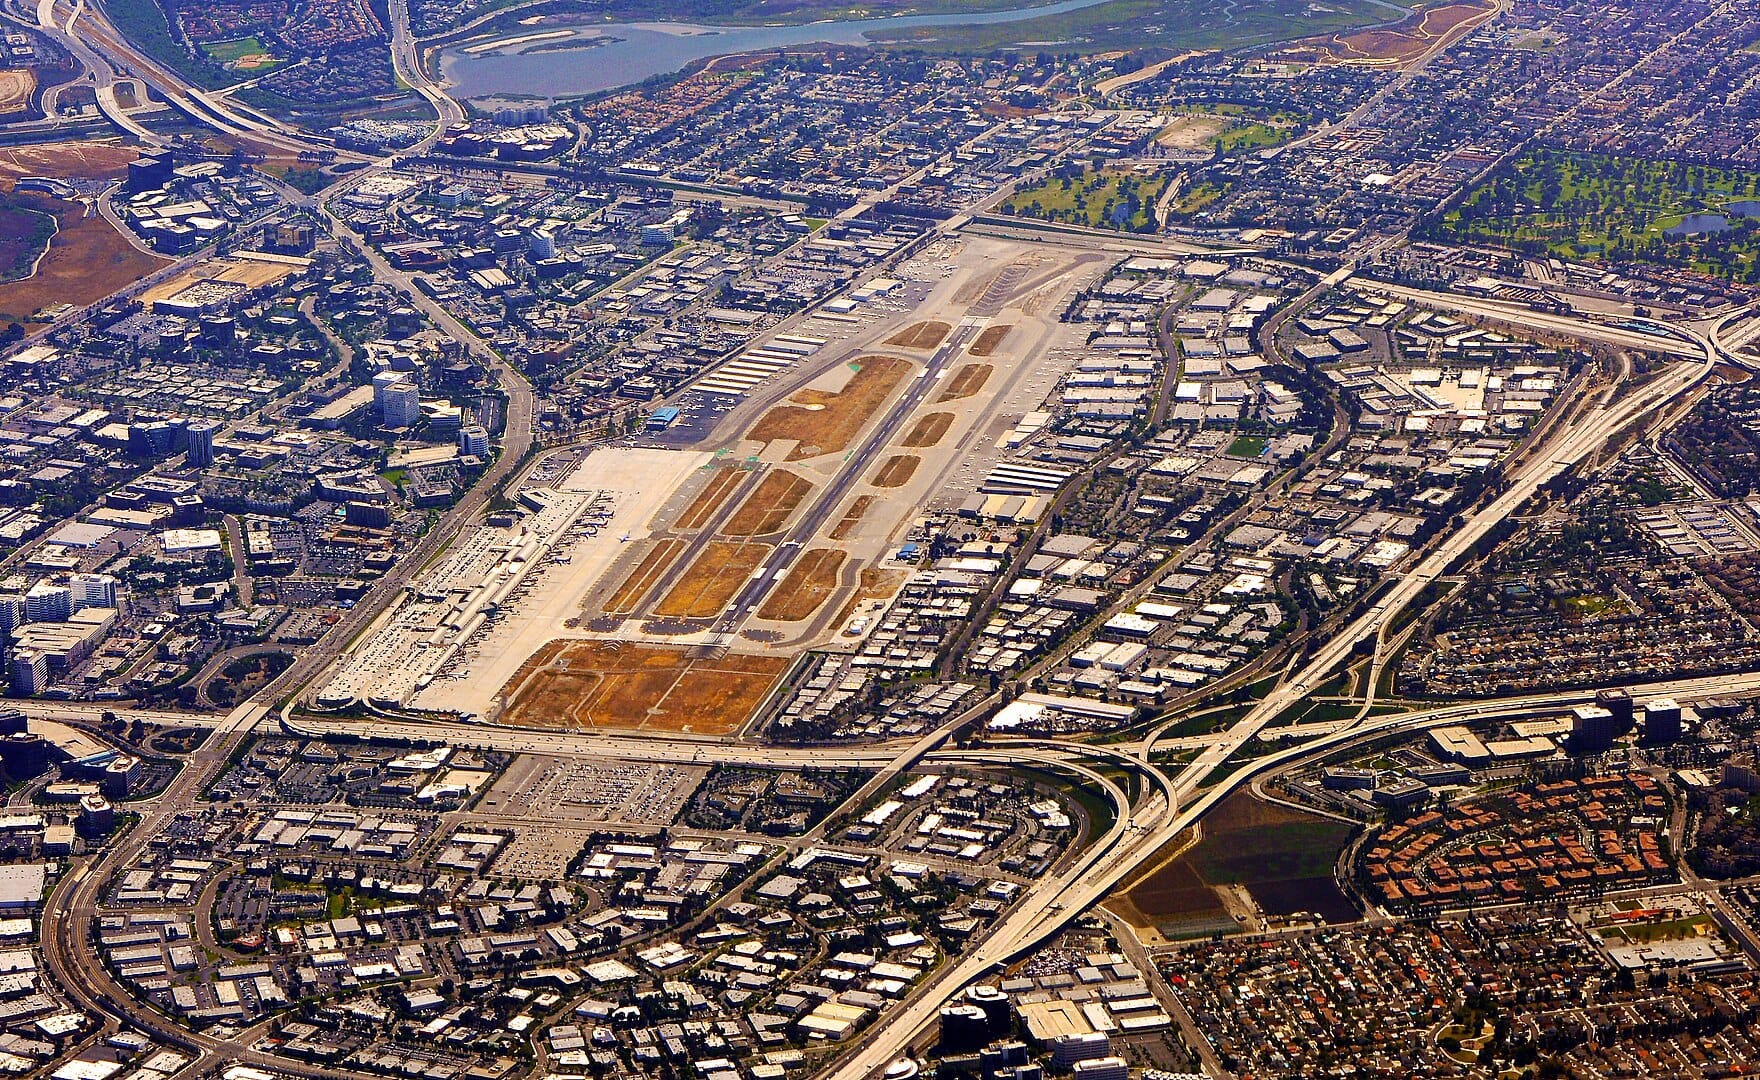 John Wayne Airport Curfew: Balancing Noise Control and Community Outrage